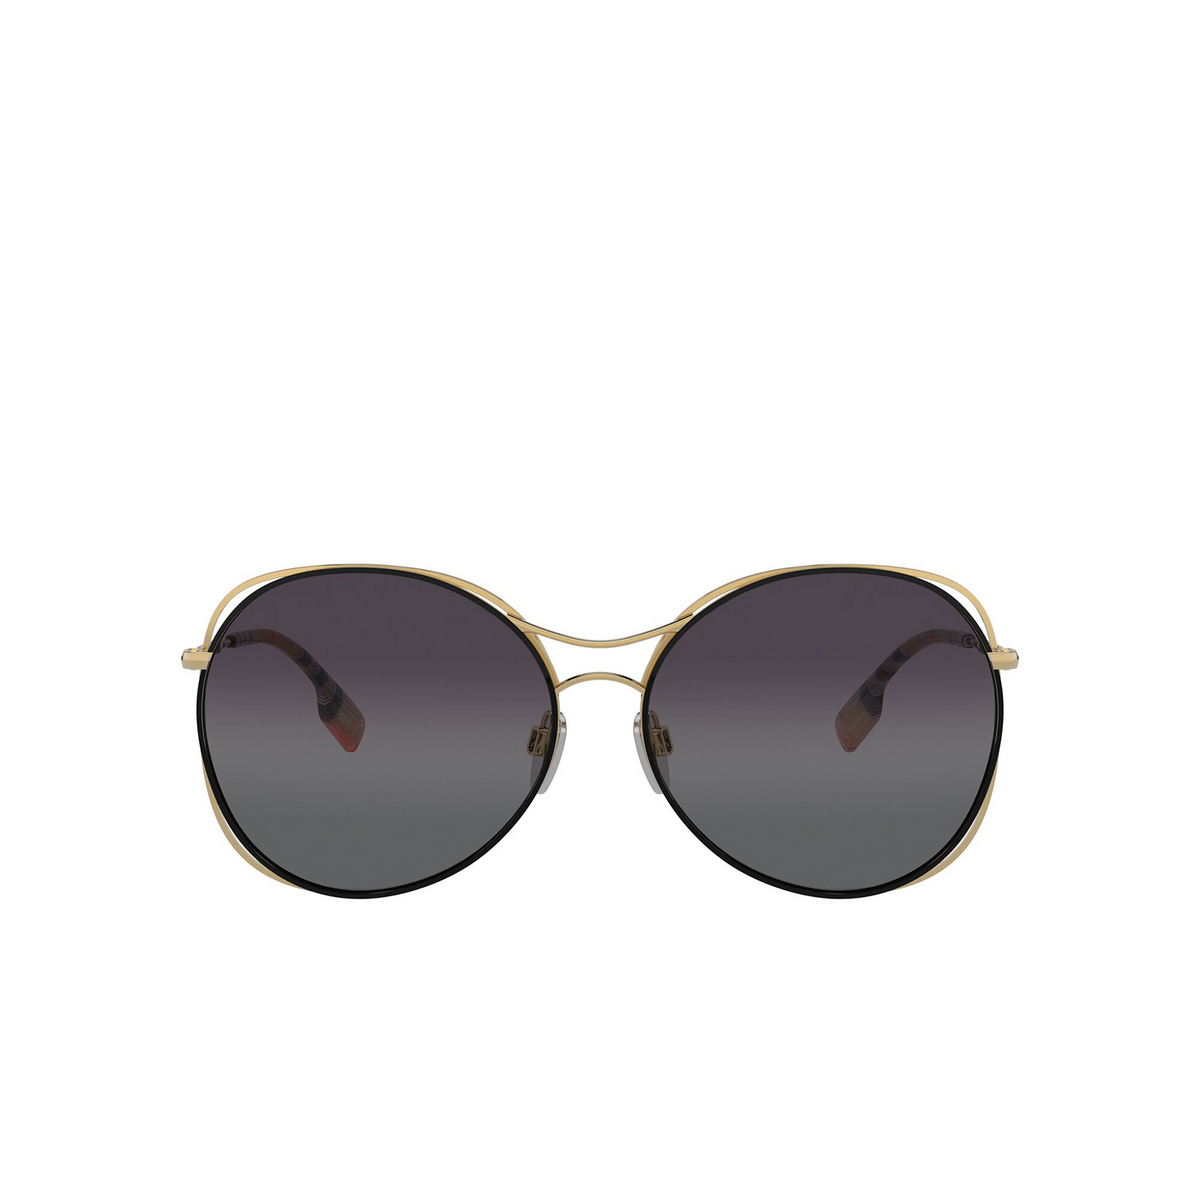 Burberry® Round Sunglasses: BE3105 color Gold / Black 10178G - front view.